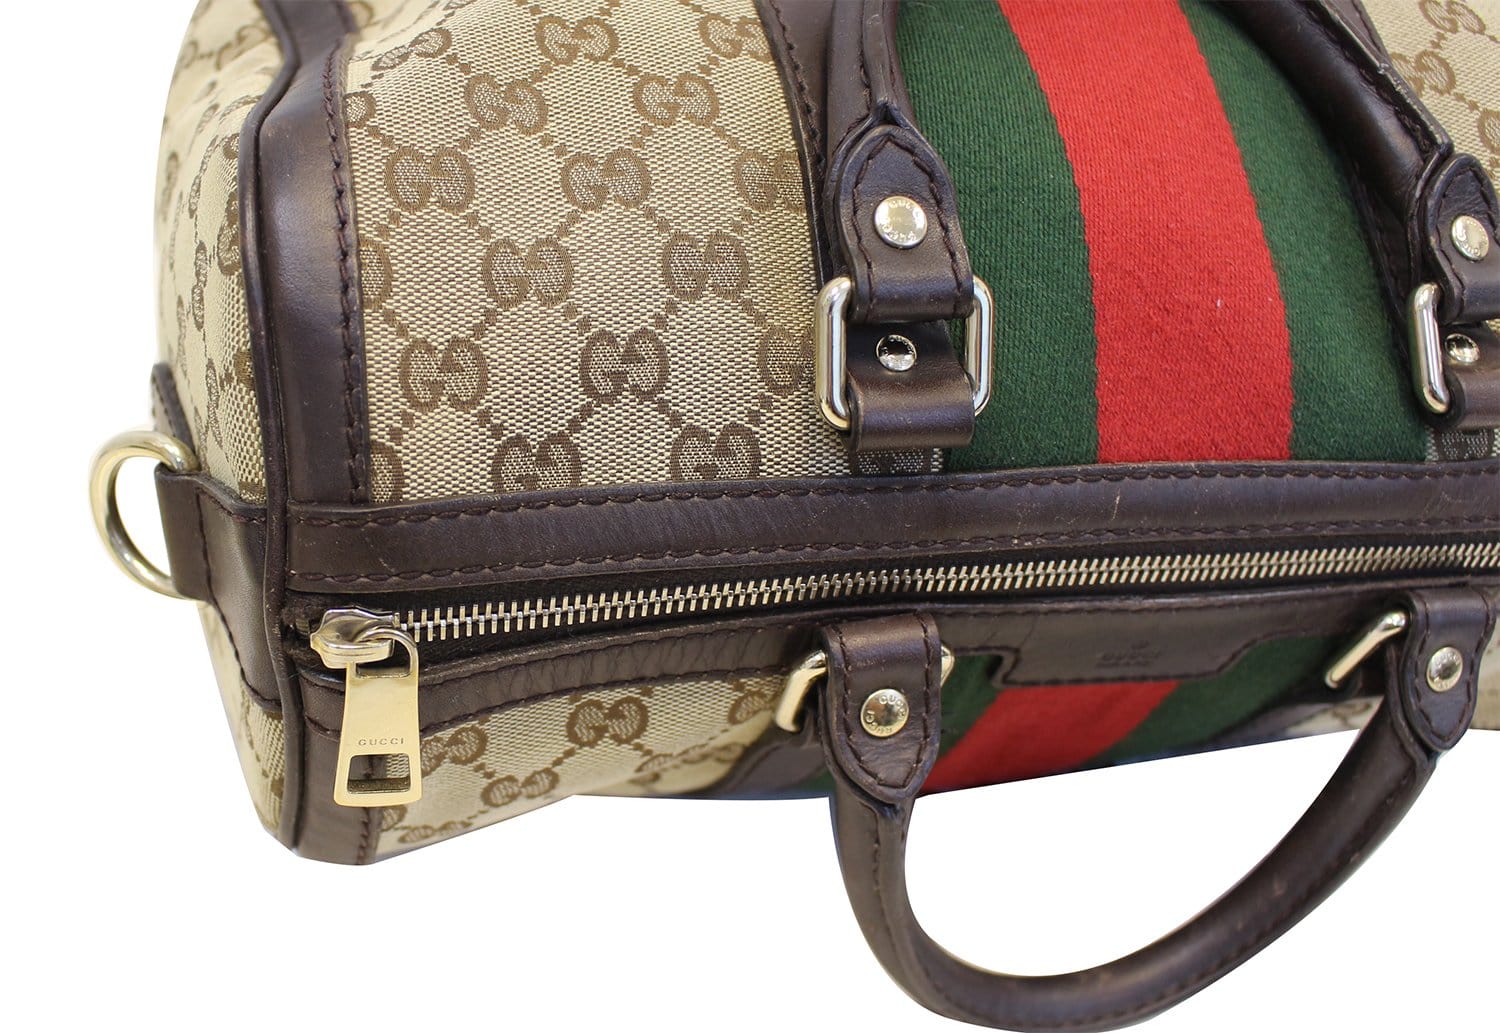 Louis Vuitton and Gucci monogram patterns + Color variants (Creator code:  MA-8281-5499-1436) : r/ACQR